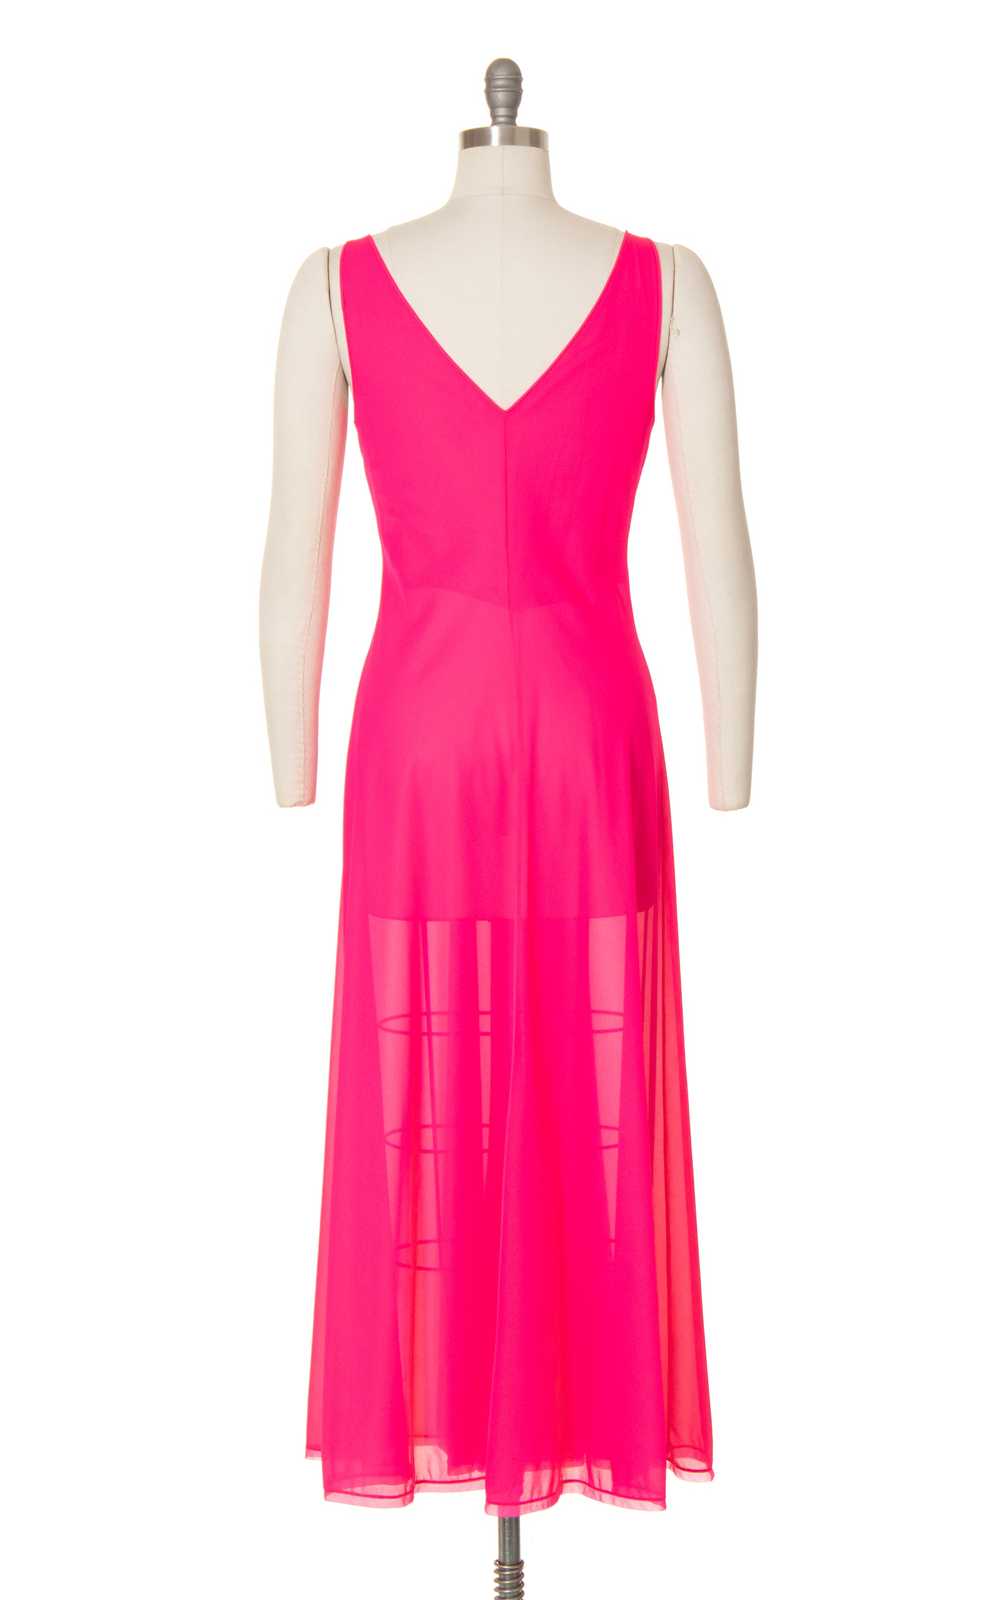 1970s Neon Hot Pink Nightgown | small/medium/large - image 6